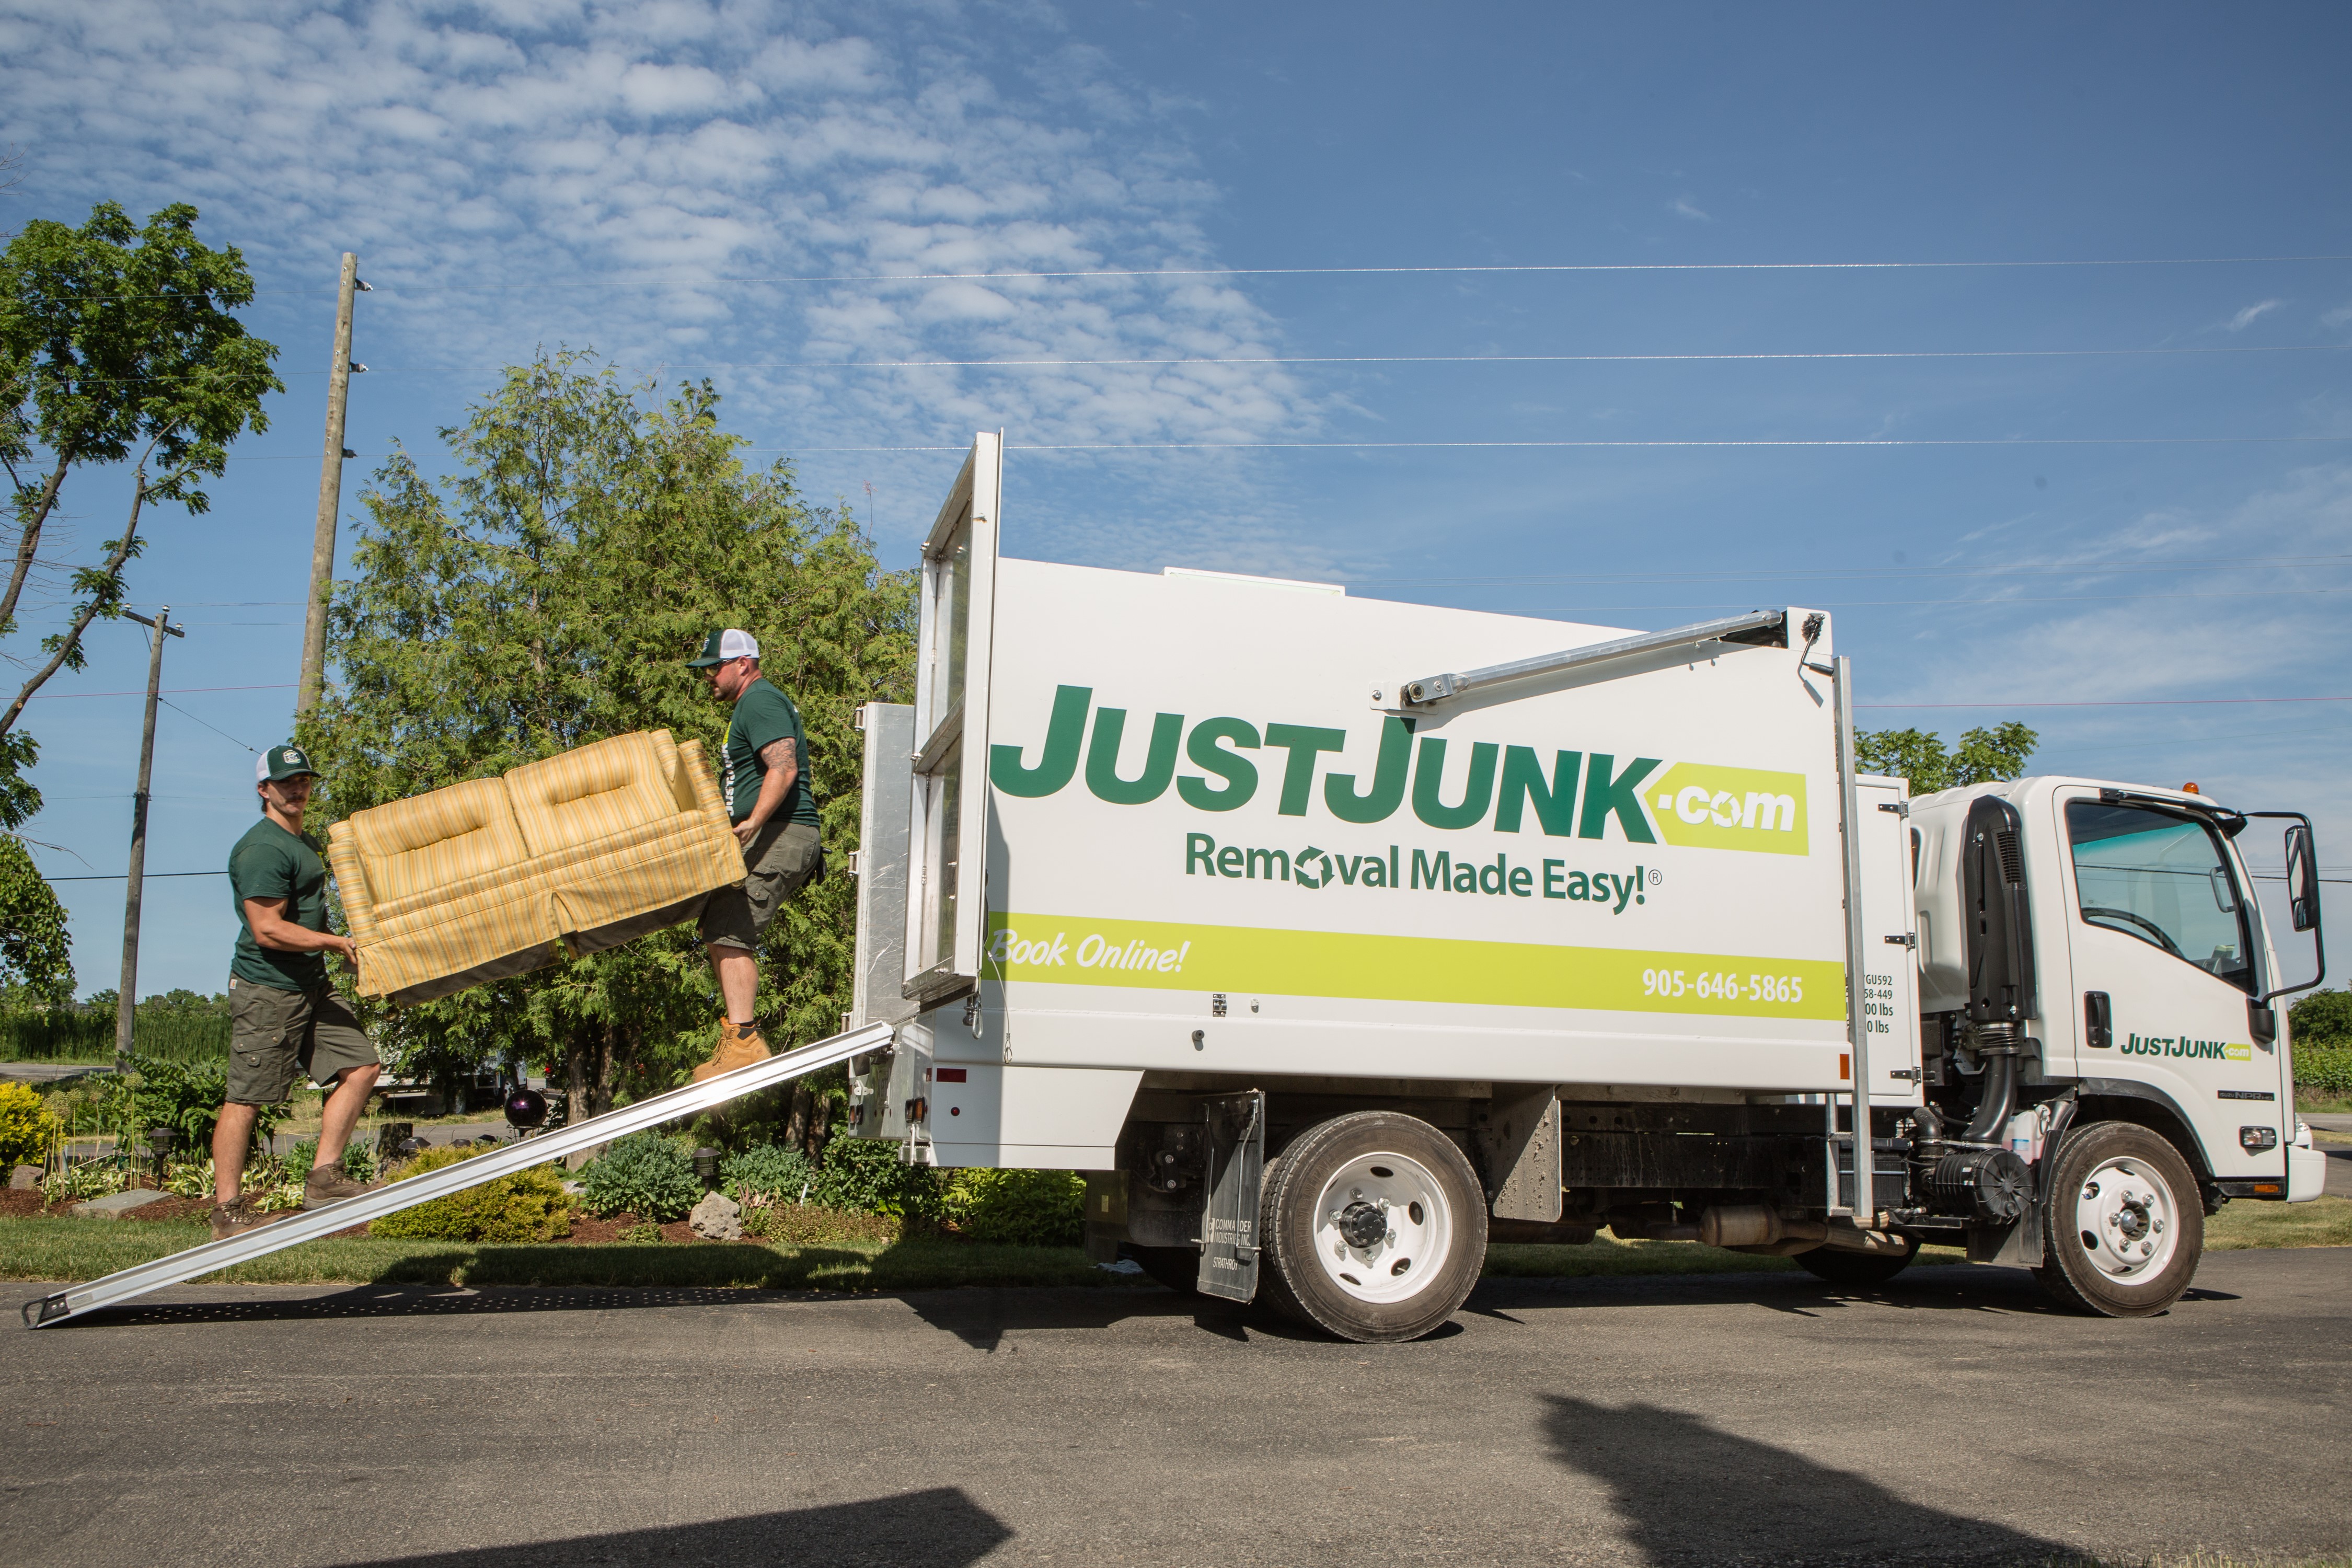 Just Junk Logo - Junk Removal and Downsizing Edmonton